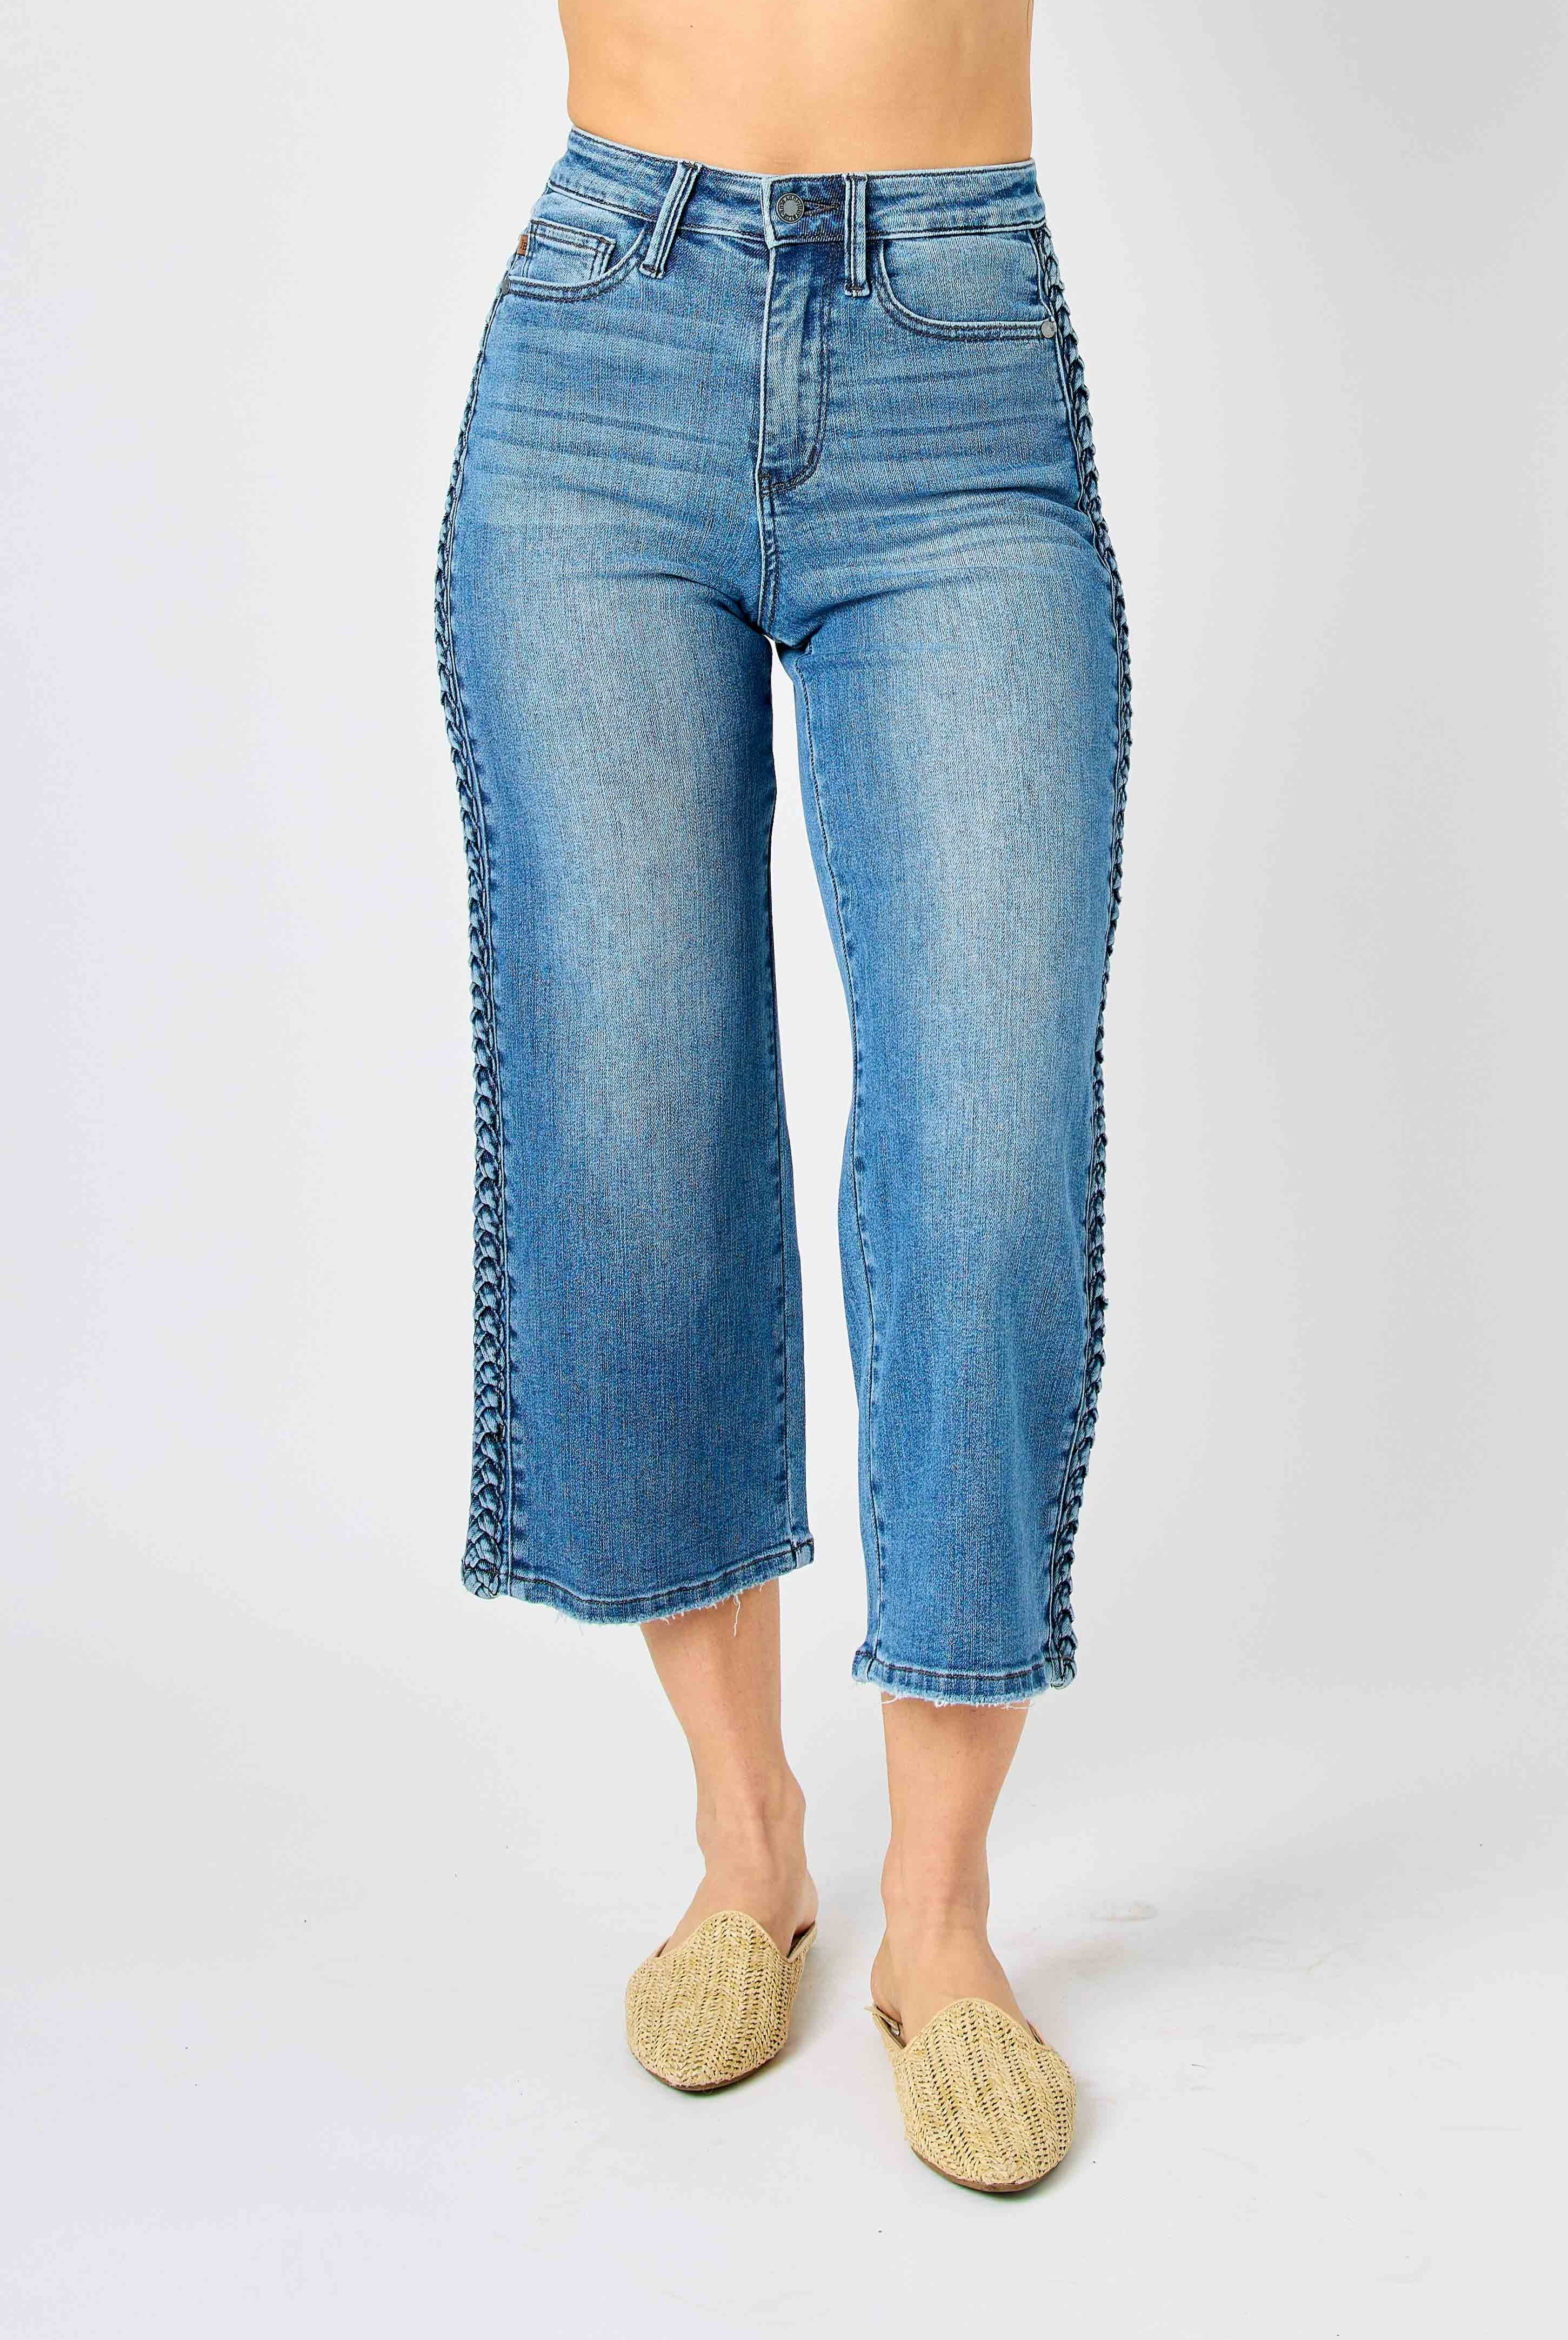 JUDY BLUE BRAIDED WIDE CROP MEDIUM WASH JEANS / STUFFOLOGY BOUTIQUE-Jeans-Judy Blue-Stuffology - Where Vintage Meets Modern, A Boutique for Real Women in Crosbyton, TX